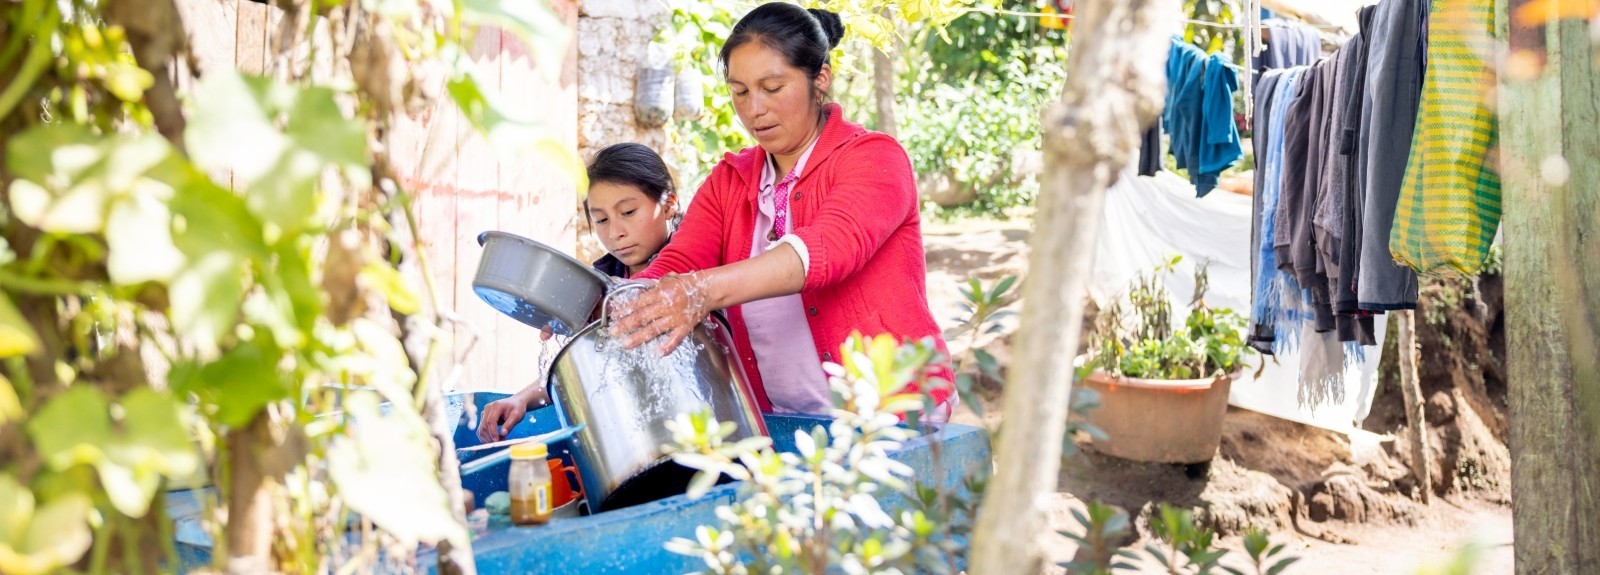 The power of arts to address health and nutrition in Guatemala